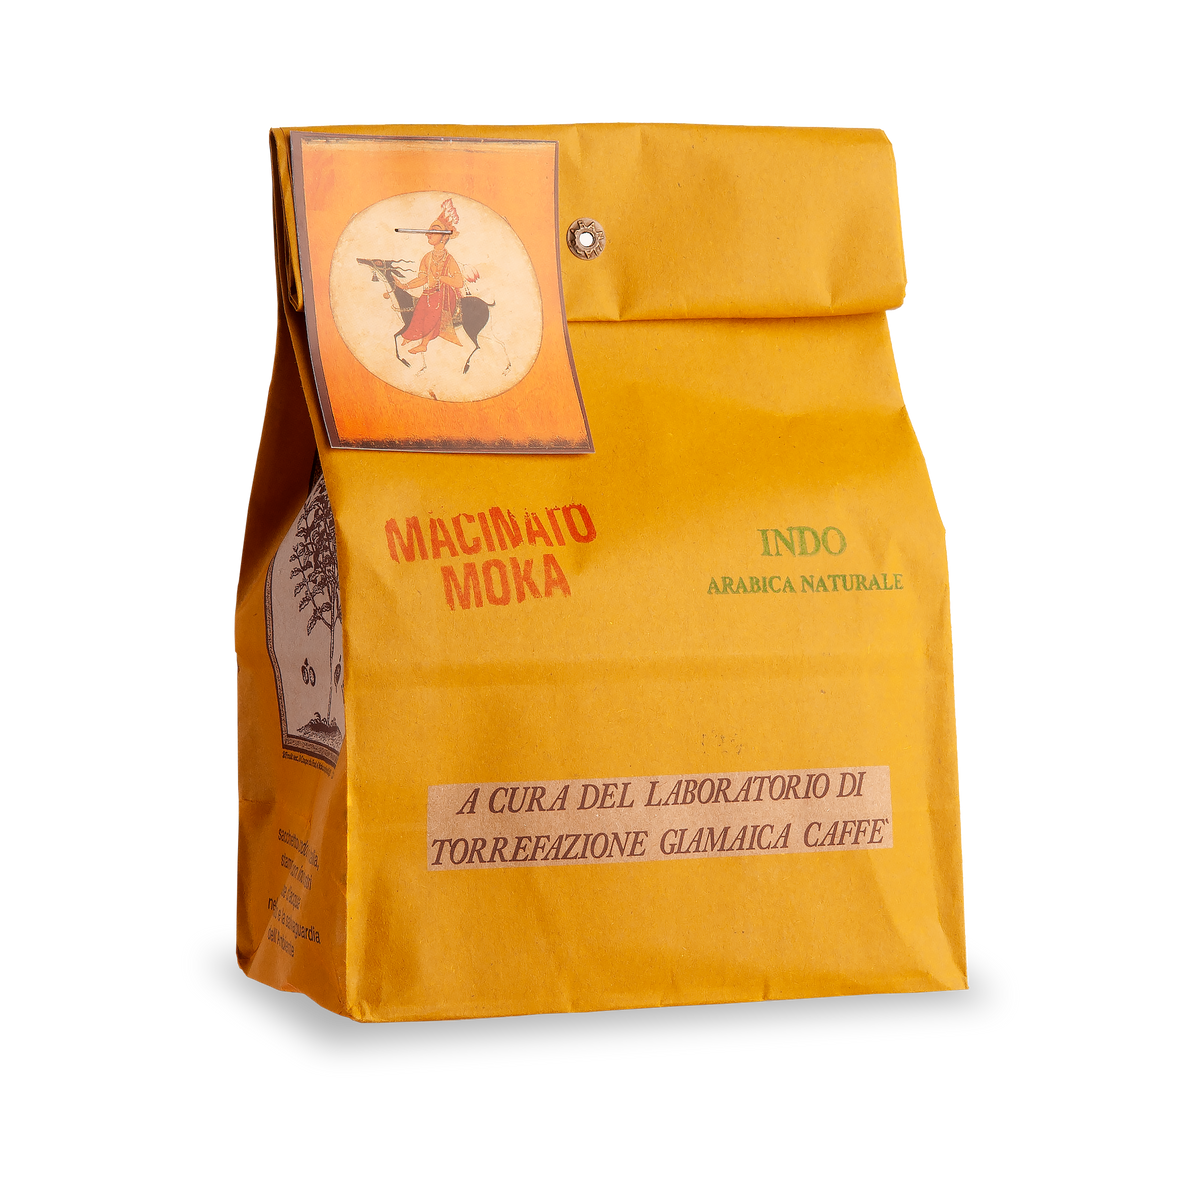 Coffee Indo Moka Grind 4 x 250g - PRE-ORDER - Contact us for further information (indulge@flemmings.wine)